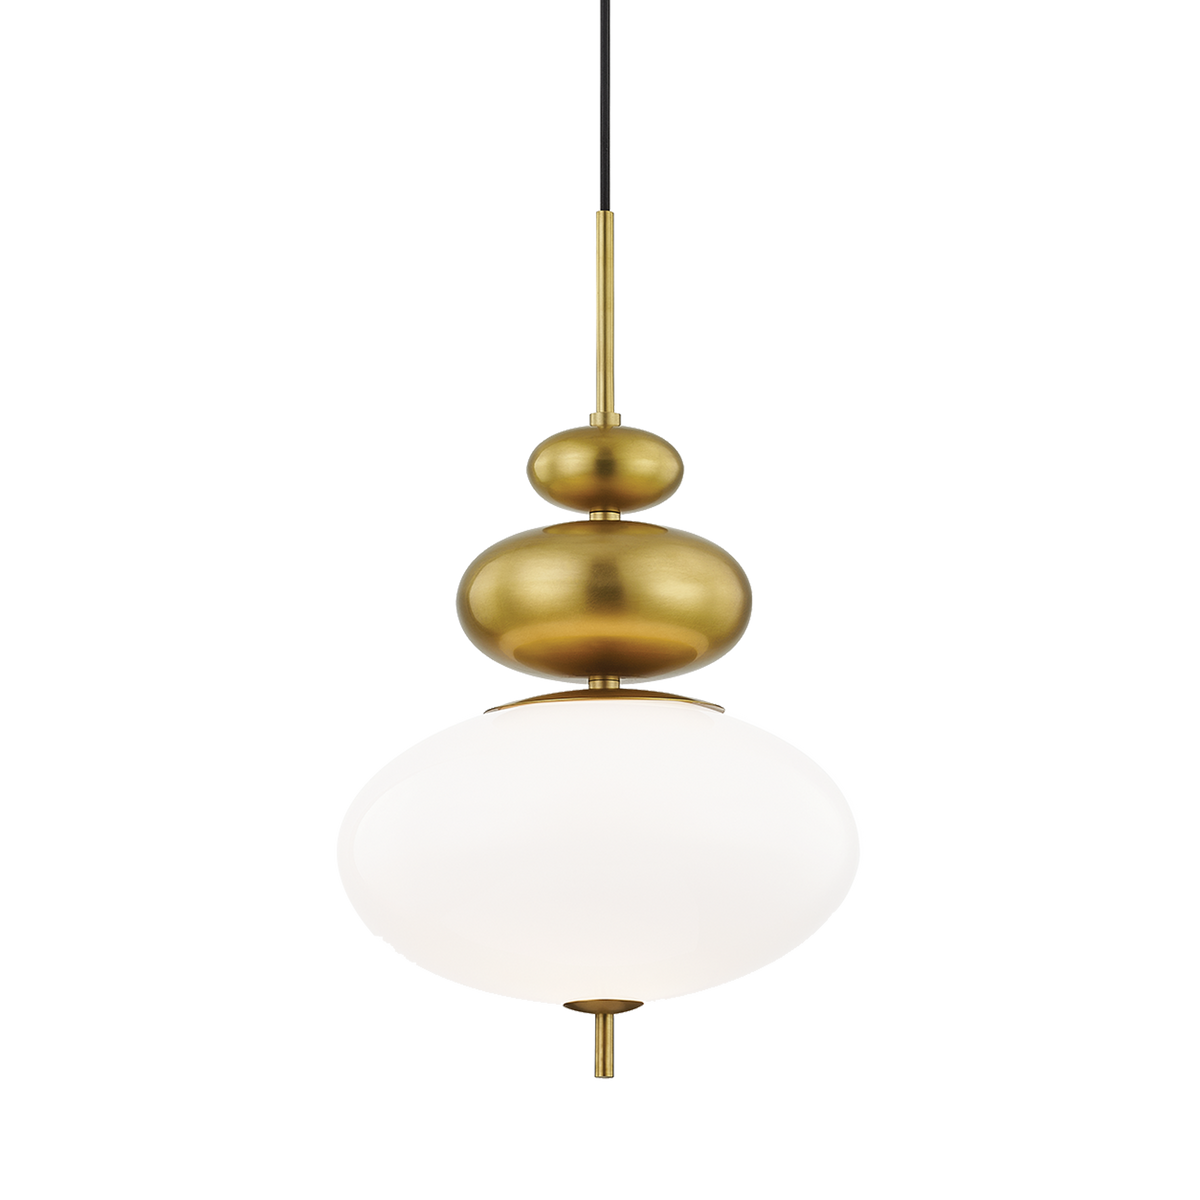 The Elsie Pendant Light features a organic shape in an aged brass finish.